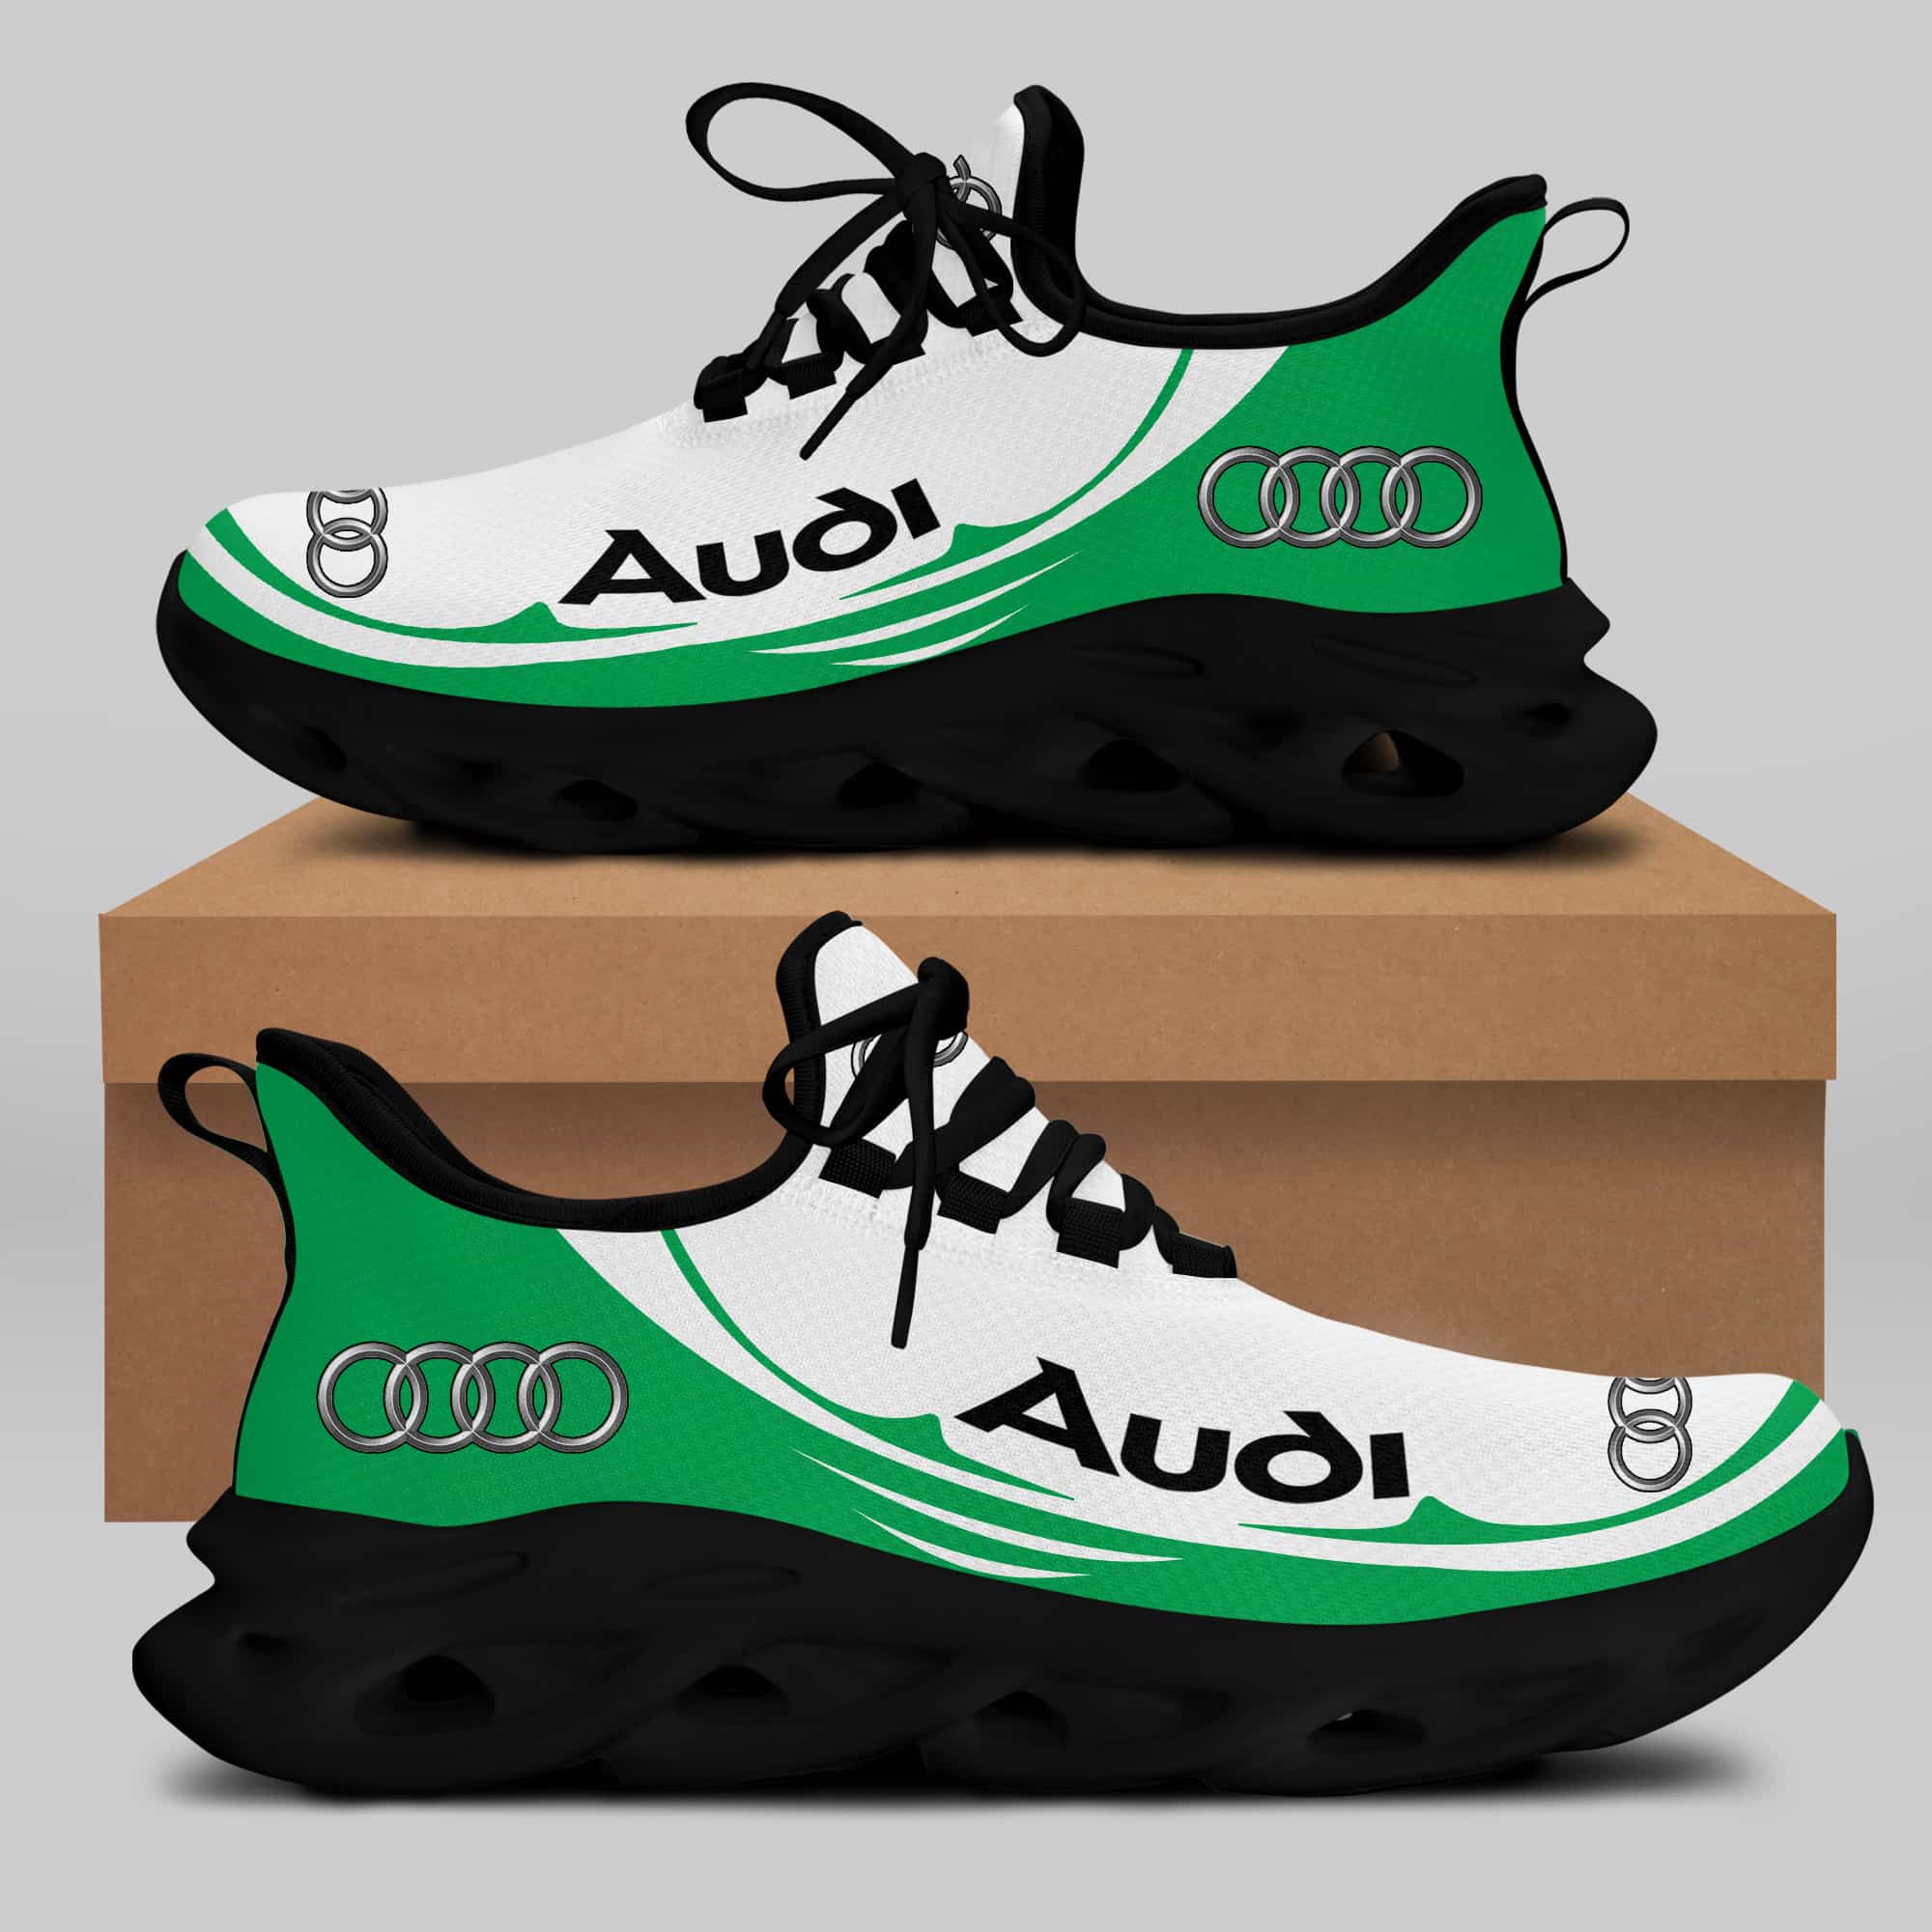 Audi Sport Running Shoes Max Soul Shoes Sneakers Ver 35 2